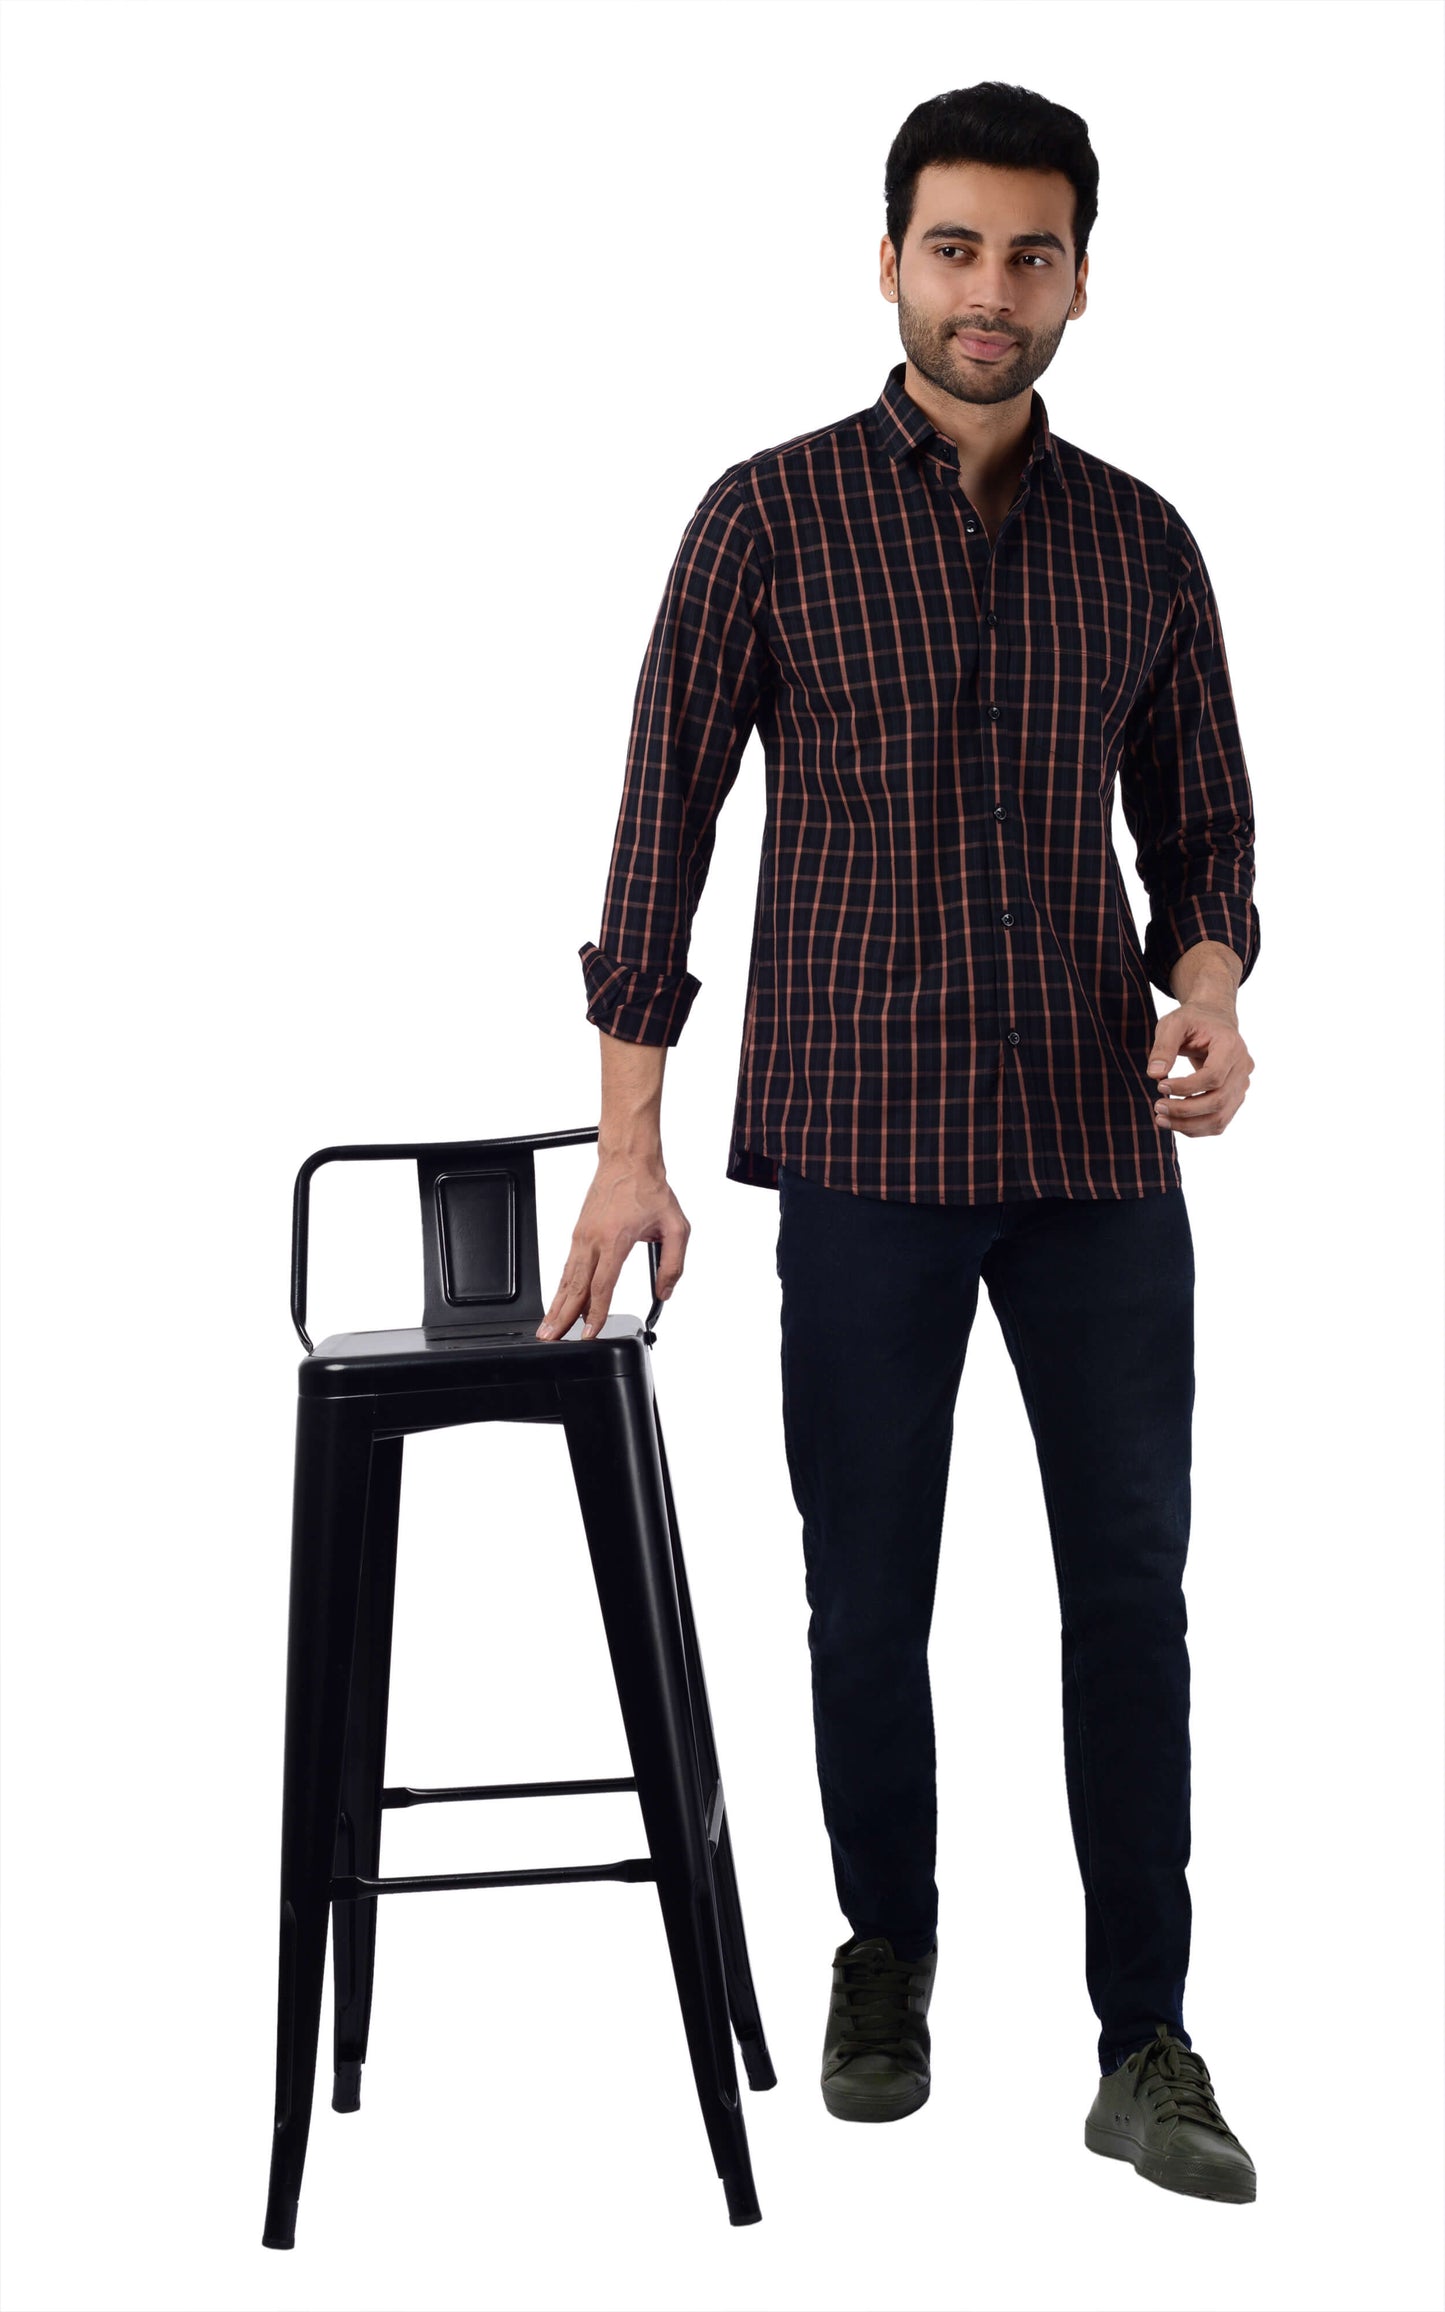 5thanfold Men's Casual  Pure Cotton Full Sleeve Checkered Black Slim Fit Shirt